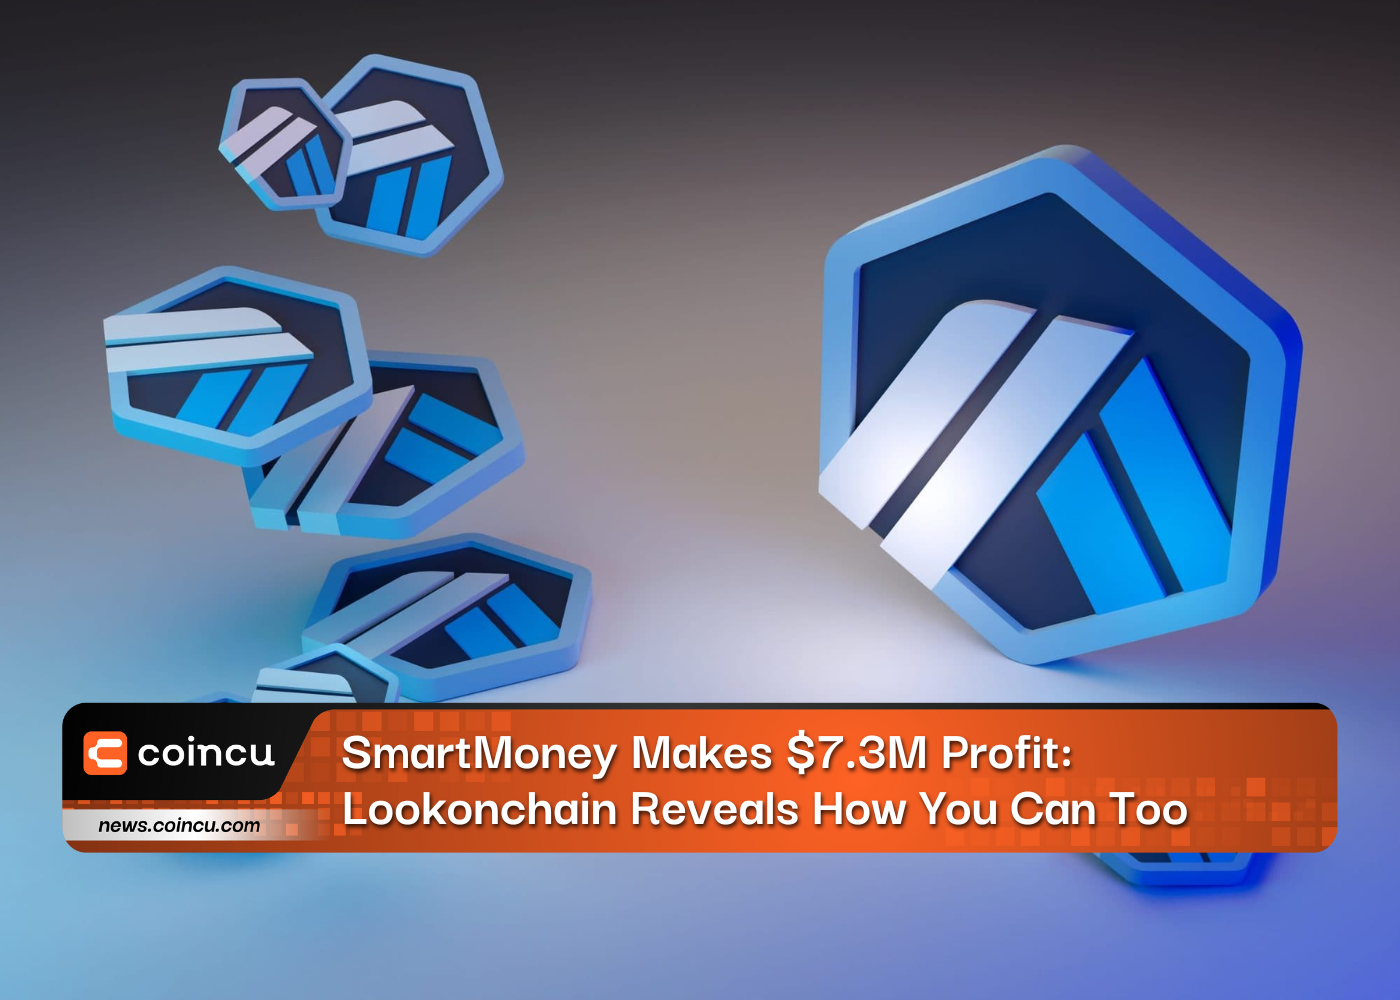 SmartMoney Makes $7.3M Profit: Lookonchain Reveals How You Can Too